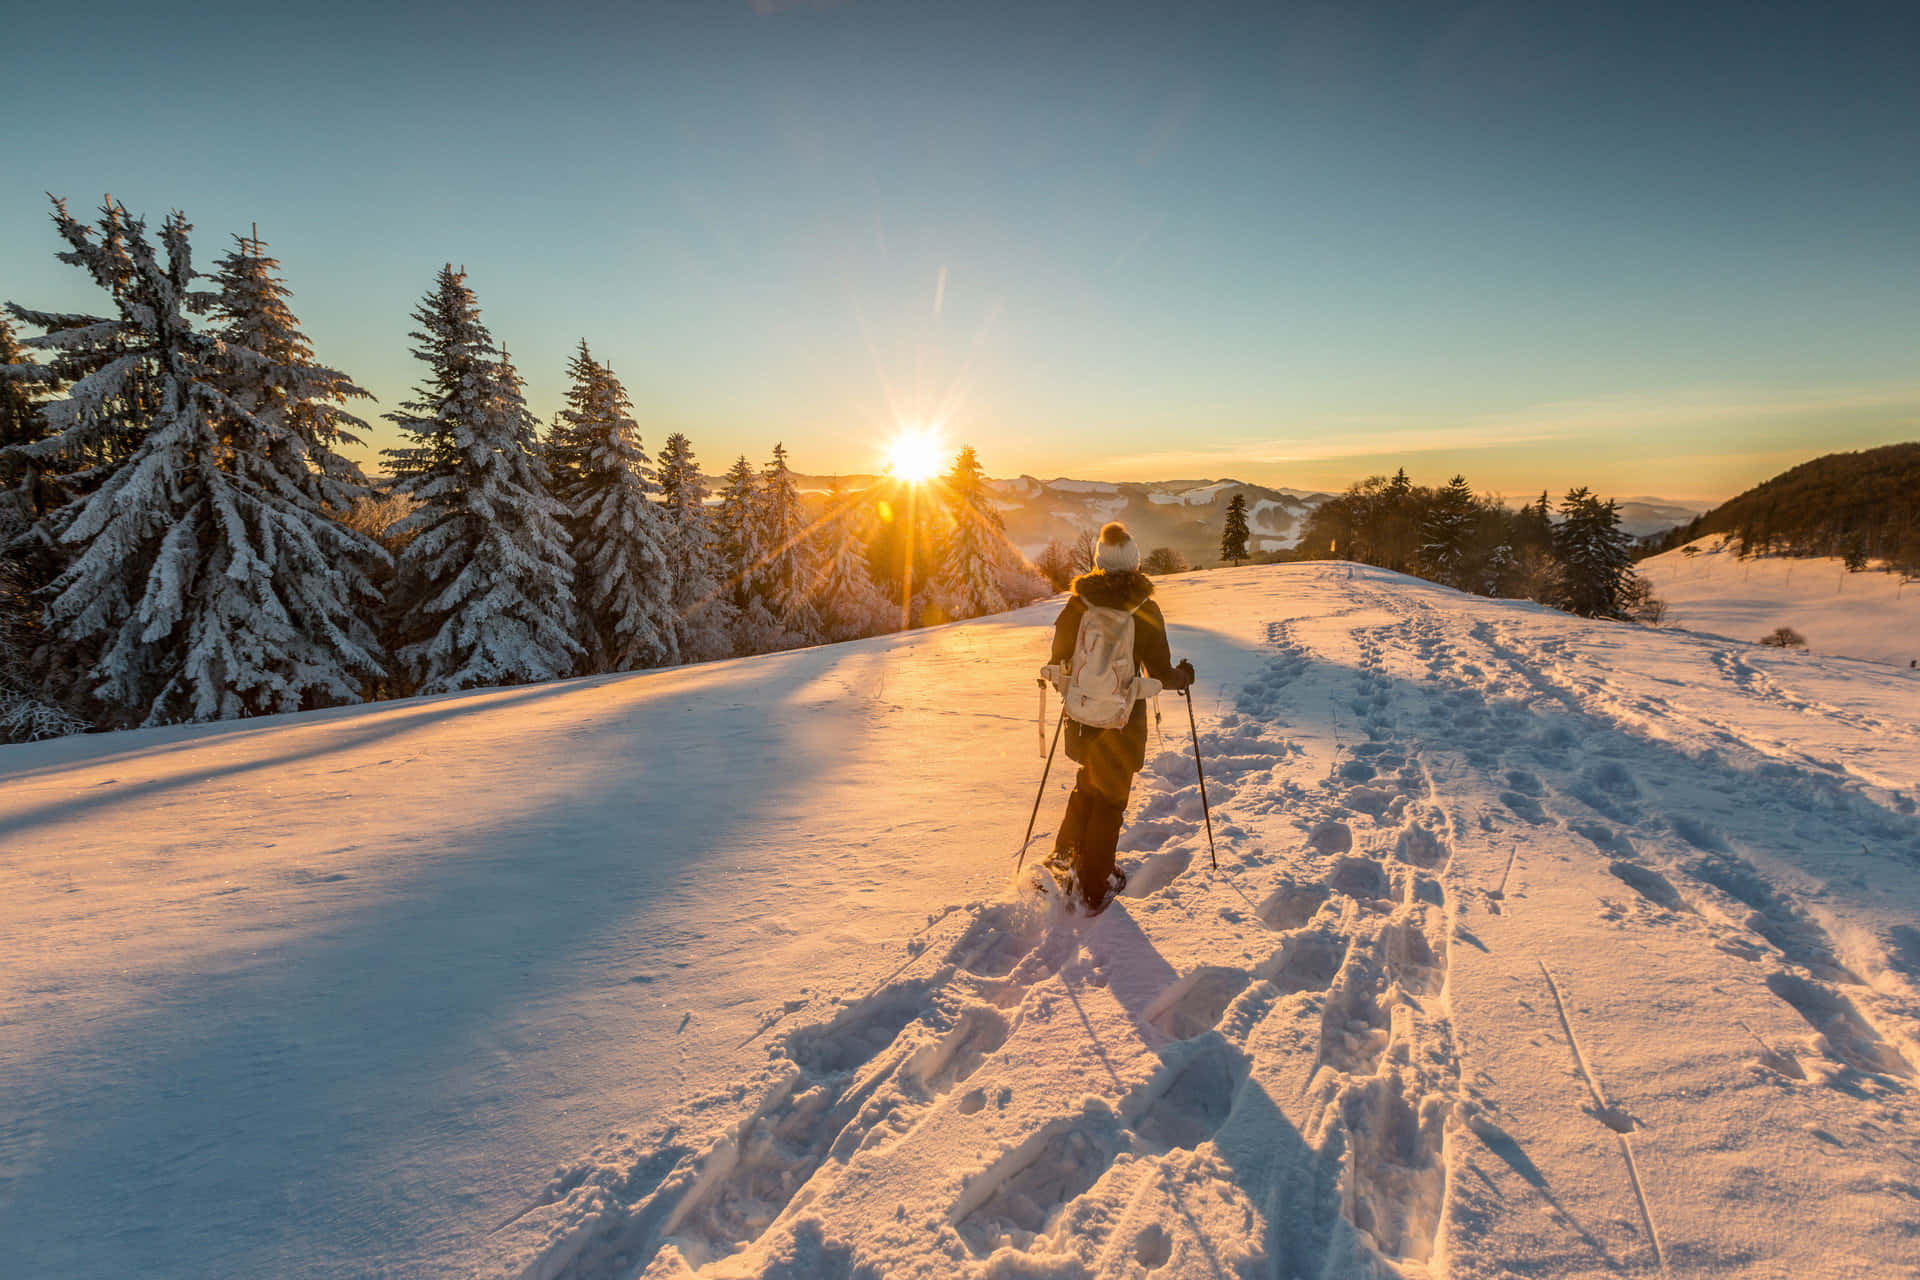 A Woman Is Skiing Down A Snowy Hill At Sunset